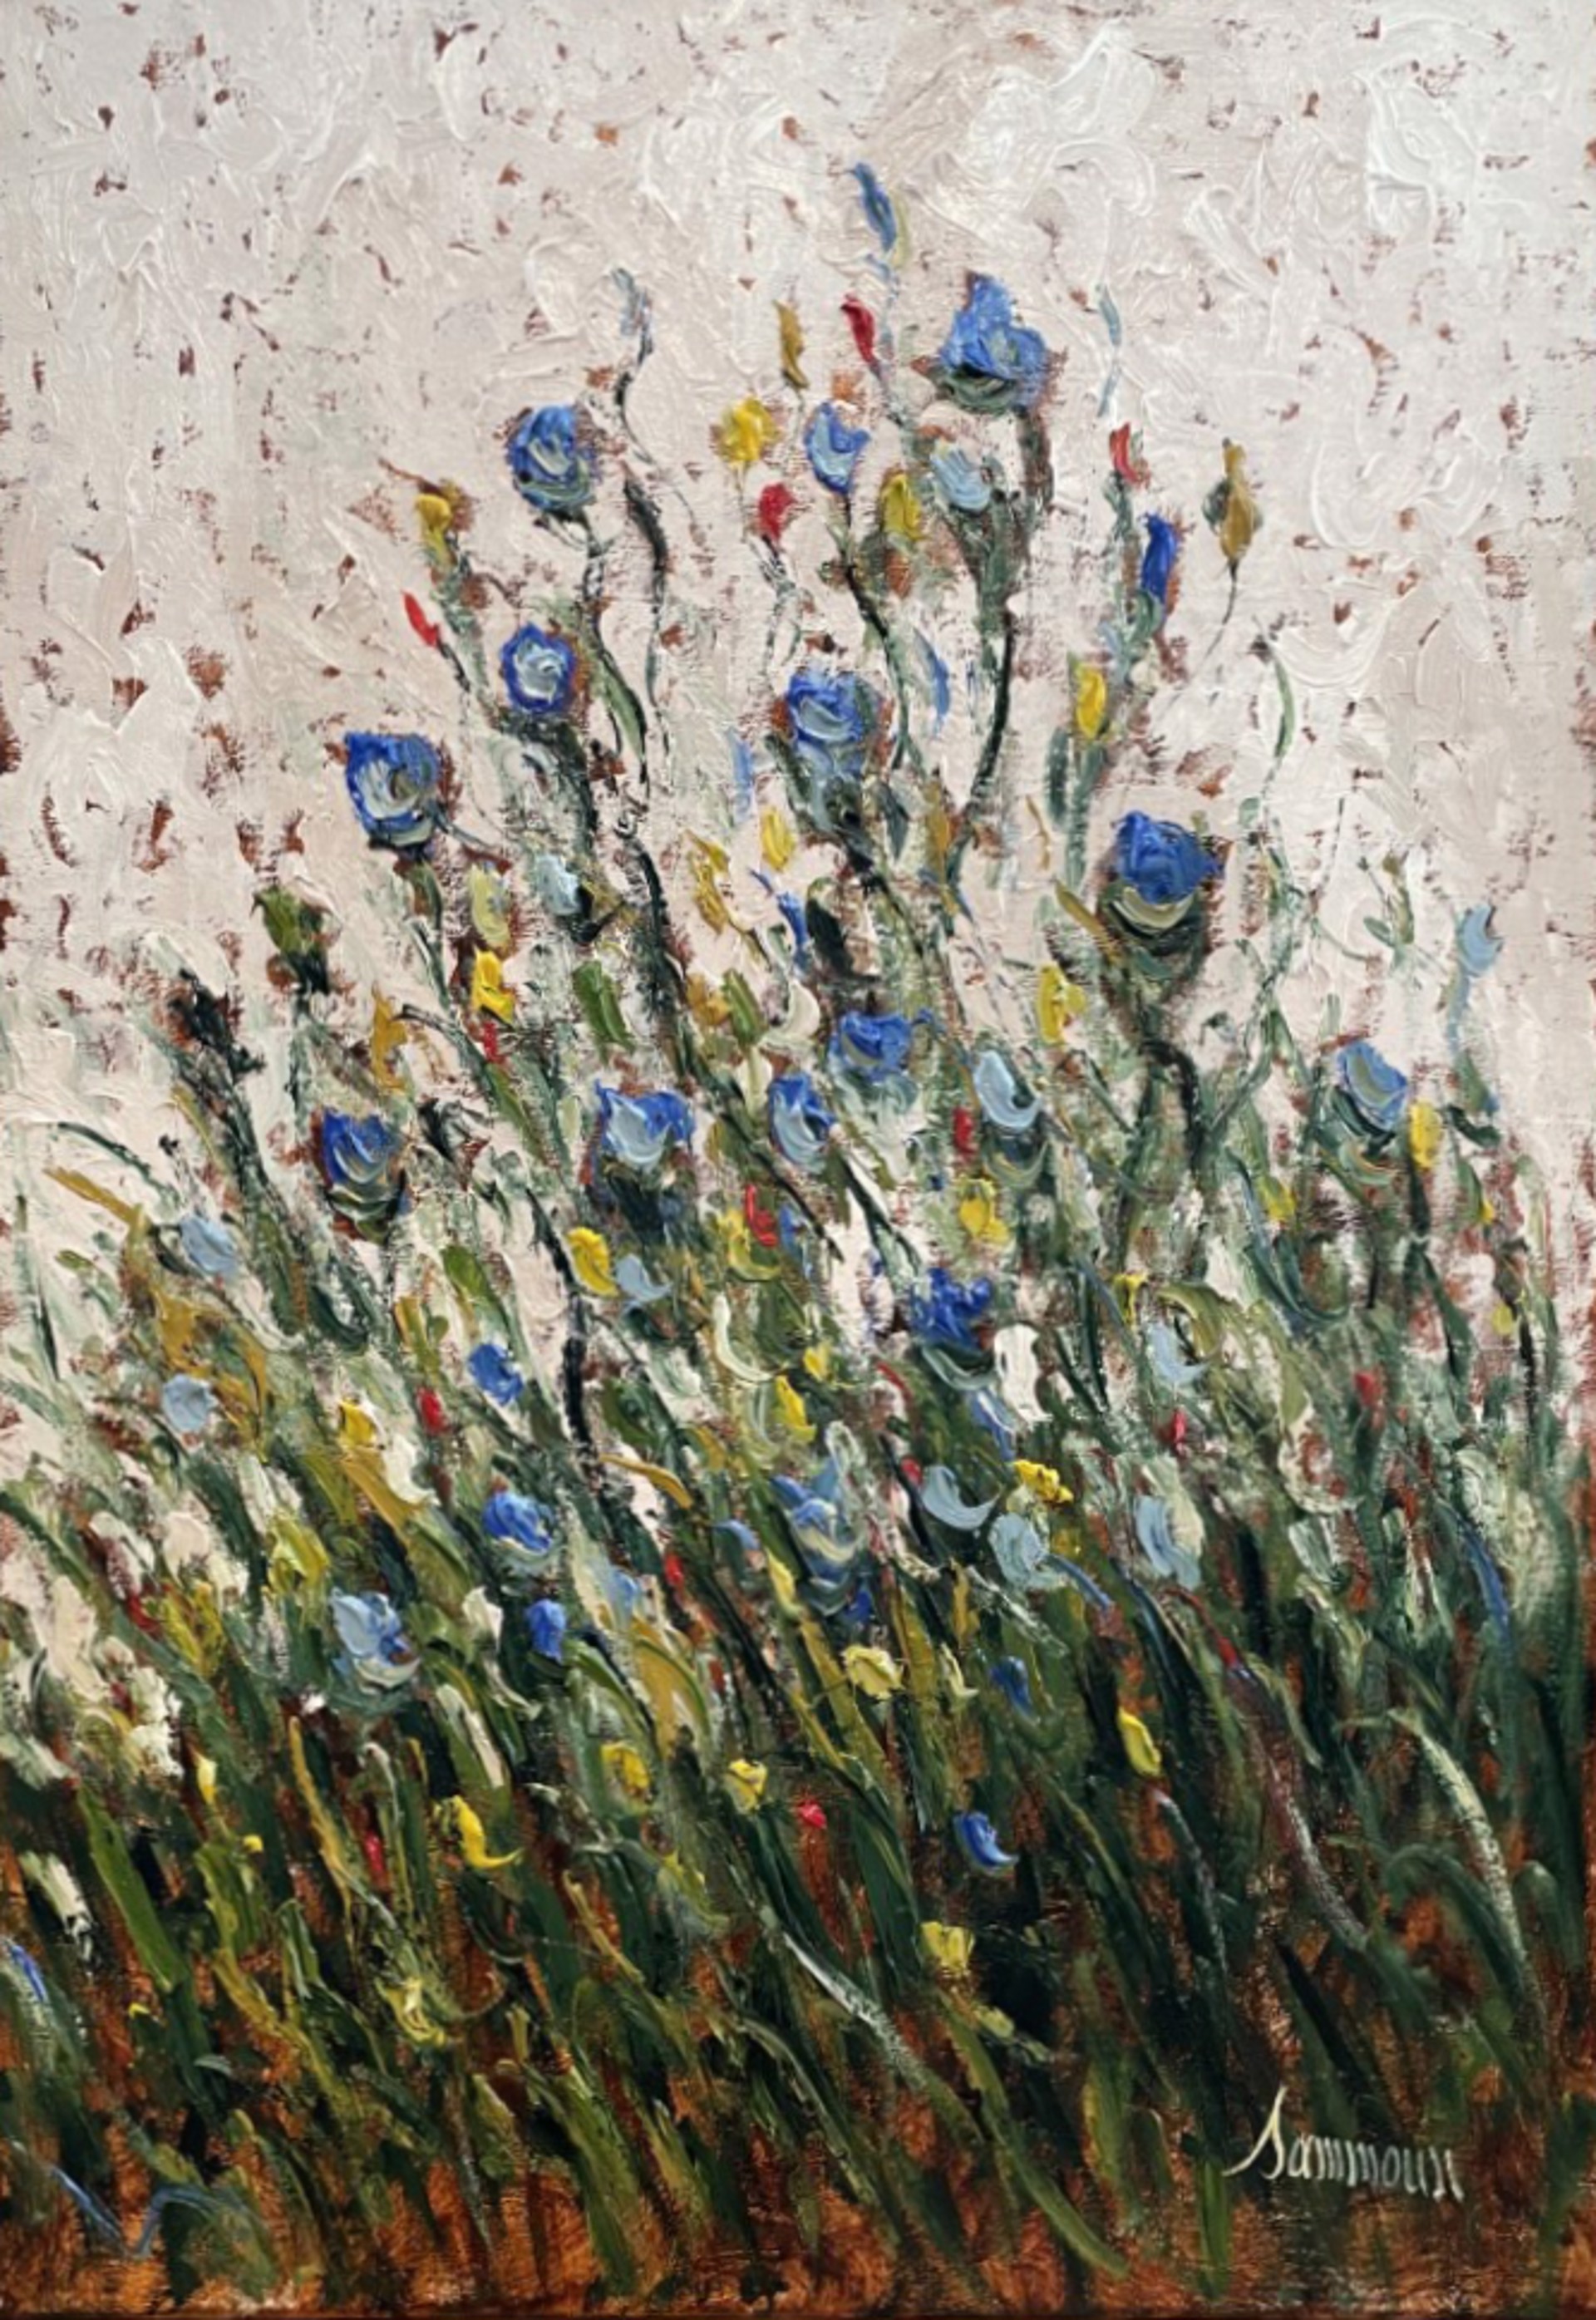 Blue poppies with Yellow and Red notes by Samir Sammoun